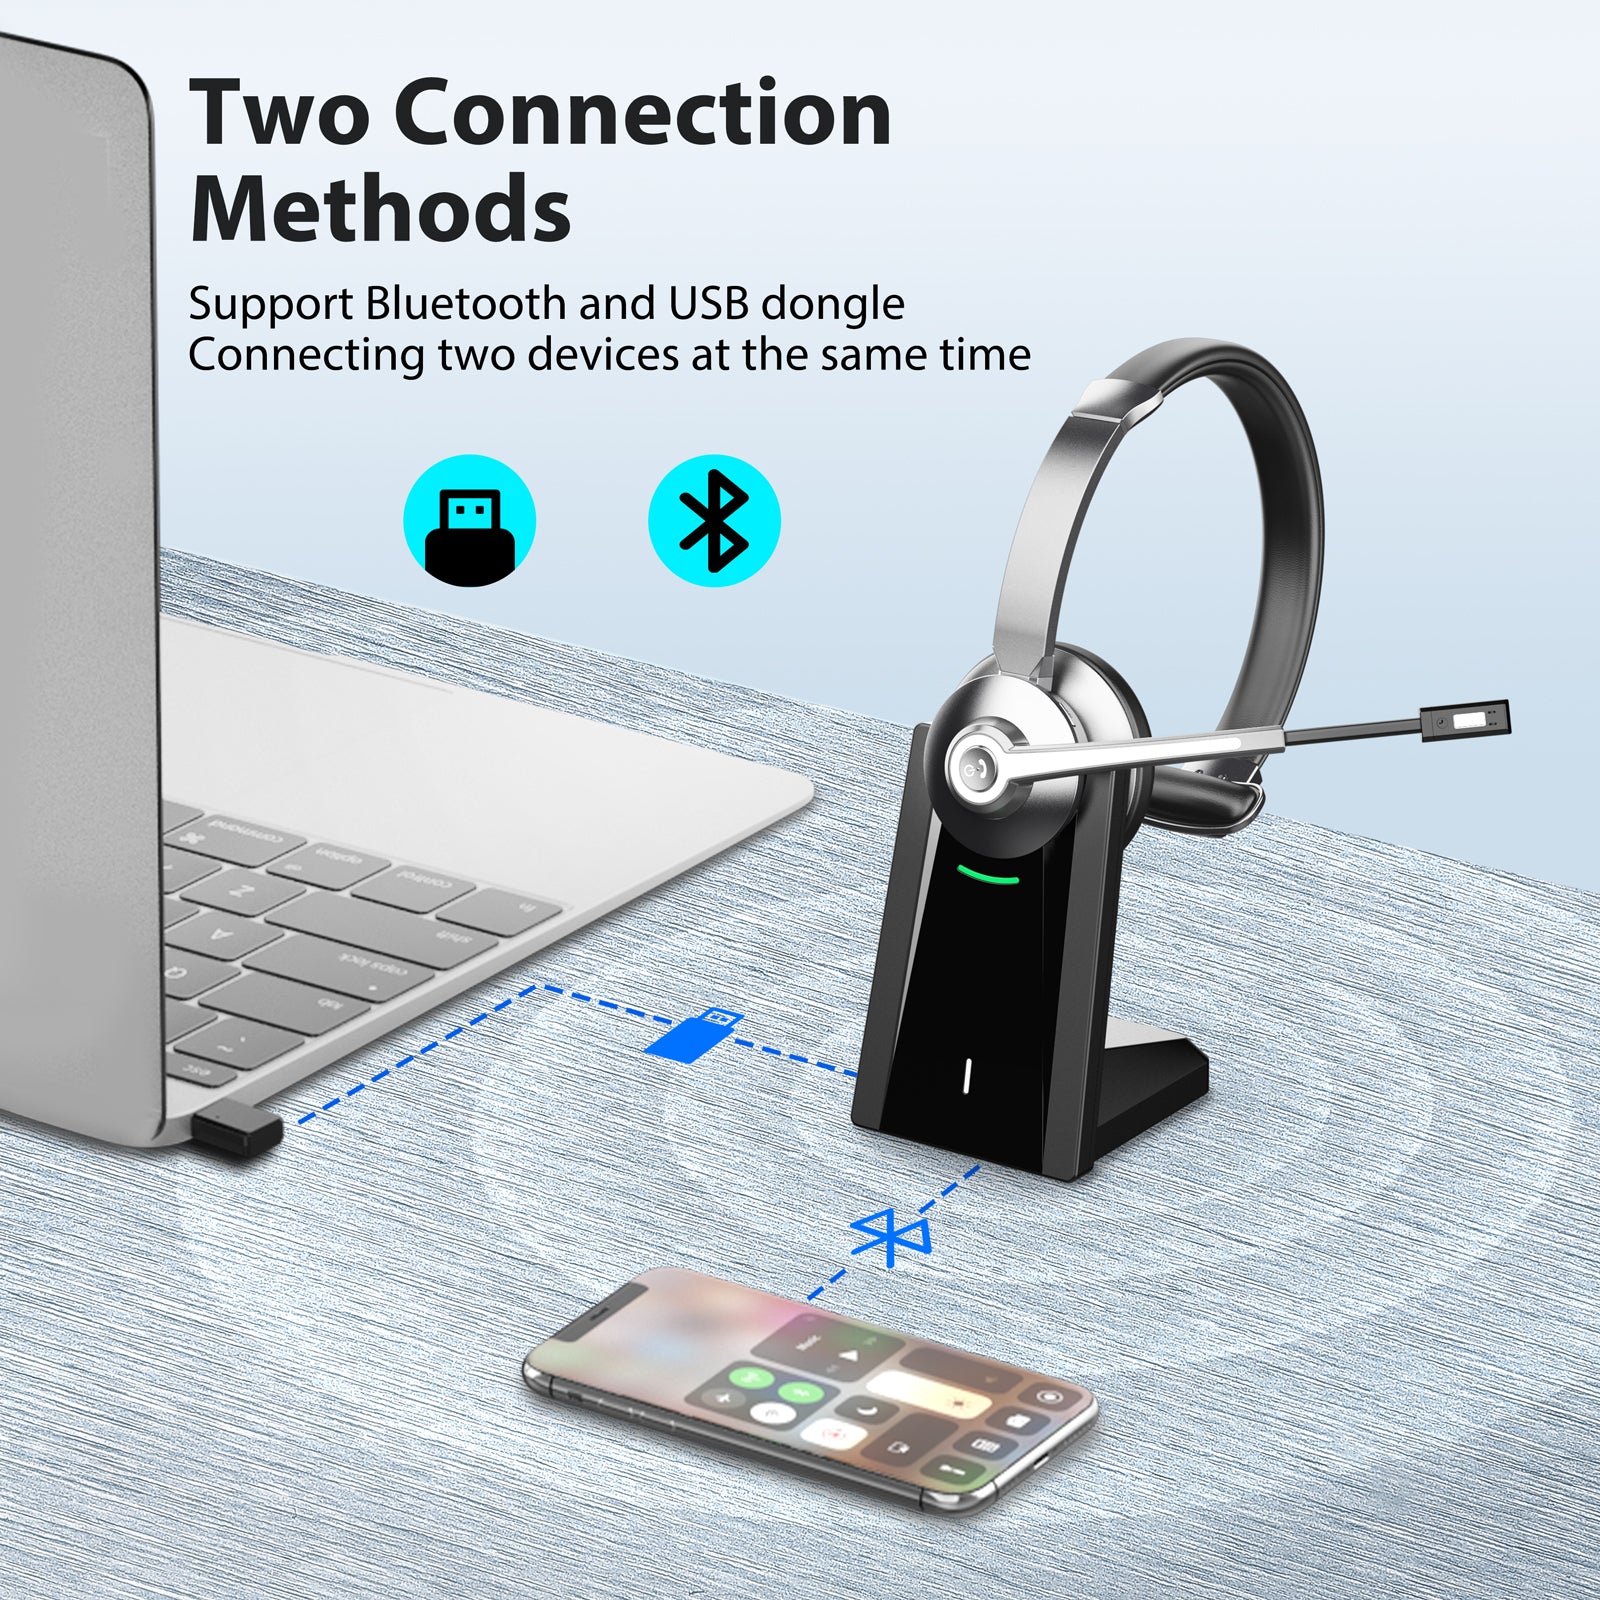 Two connection methods,Support bluetooth and USB dongle connecting two devices at the same time.